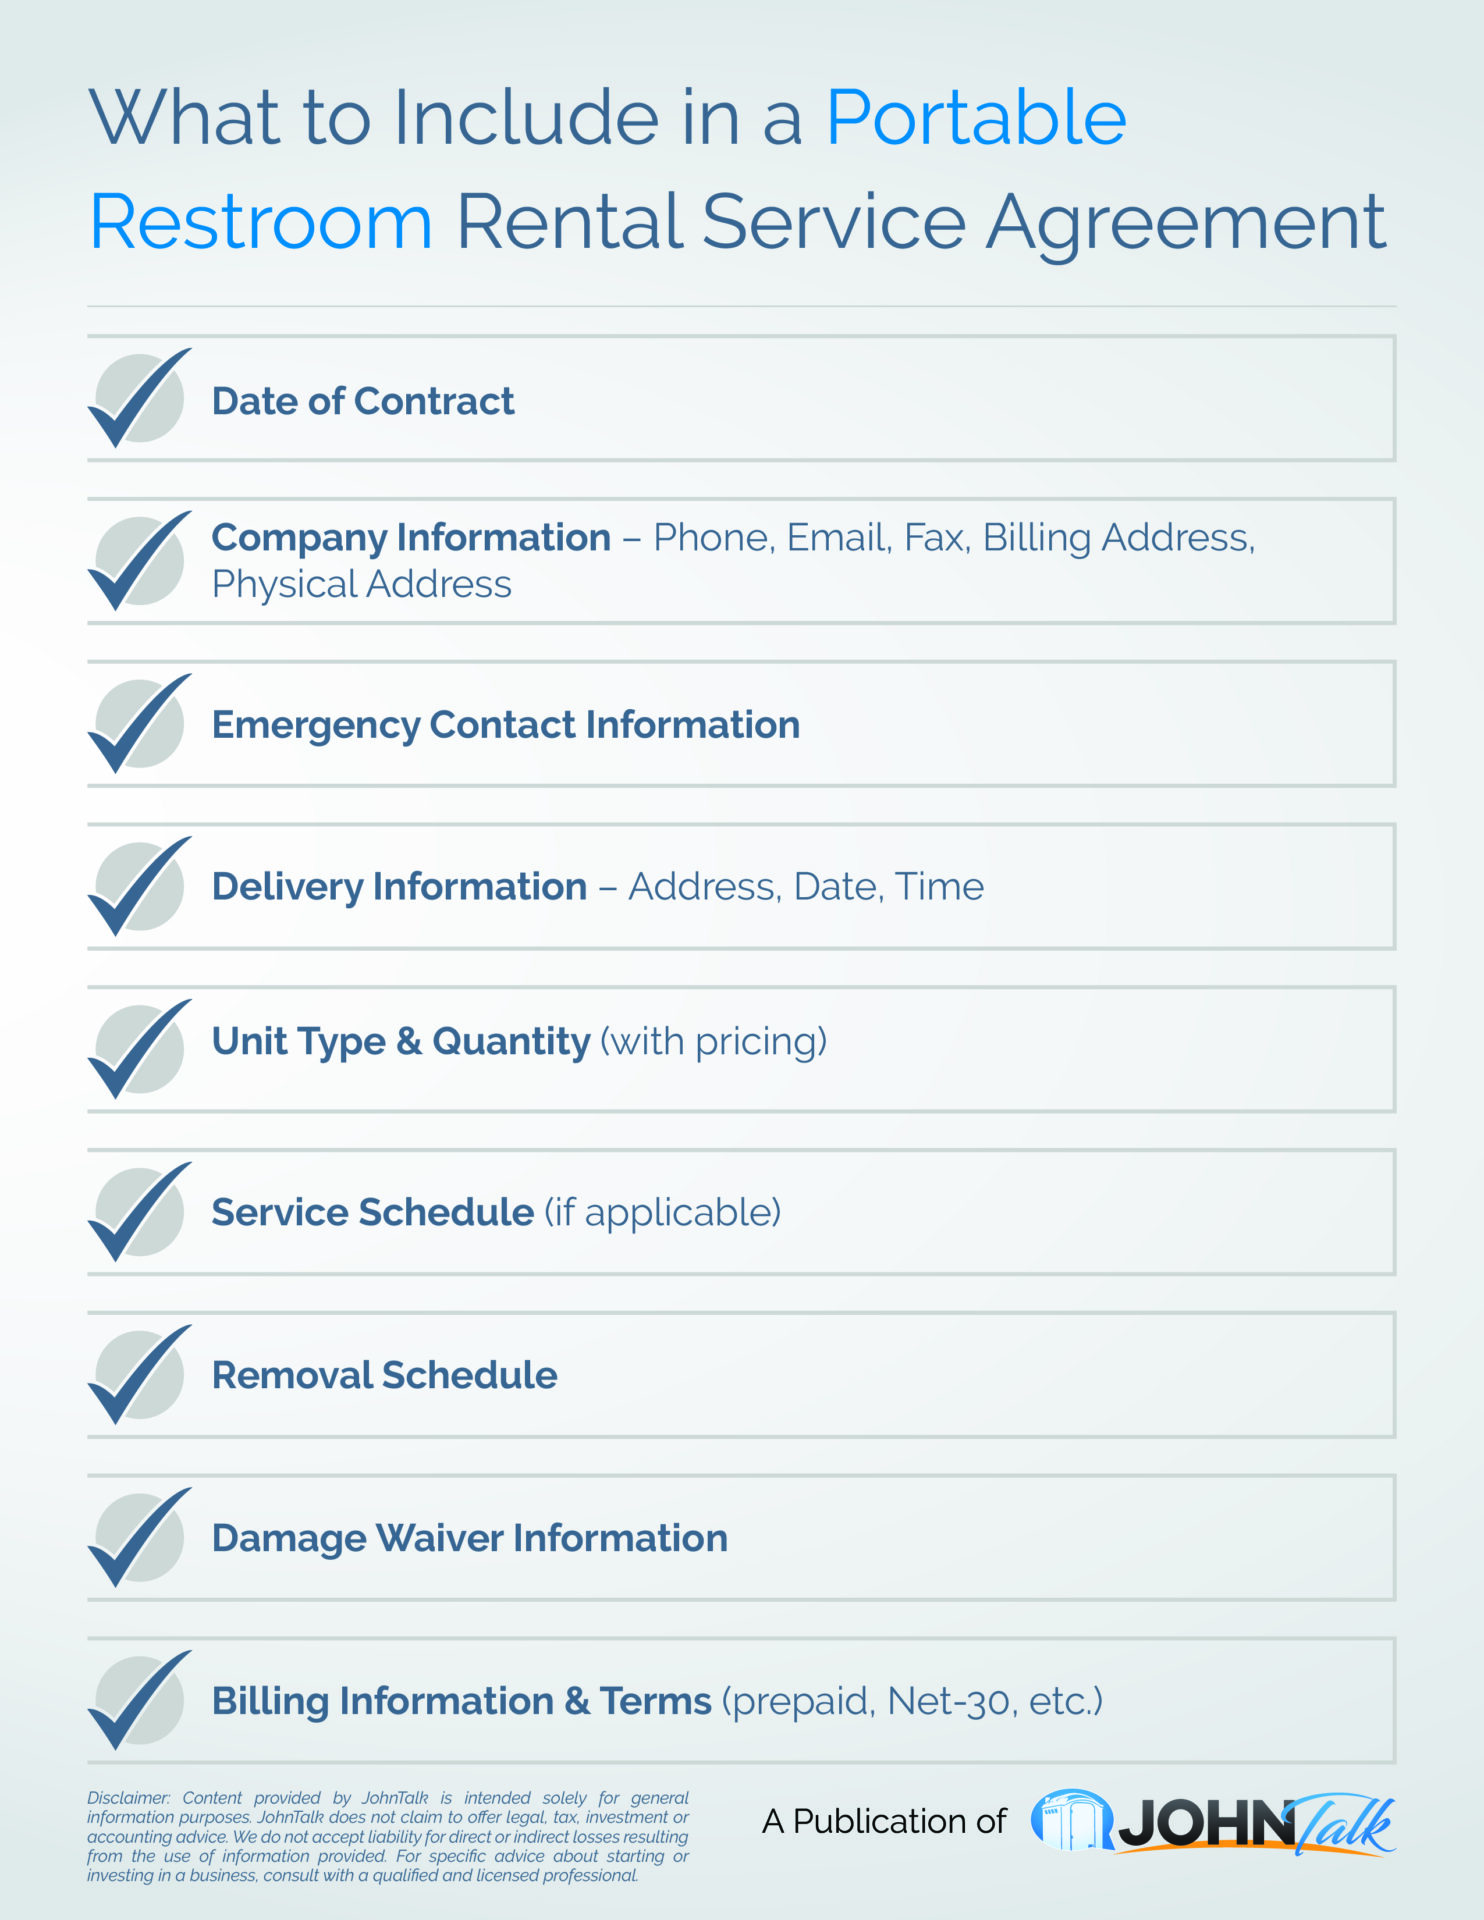 What to Include in a Portable Restroom Rental Service Agreement